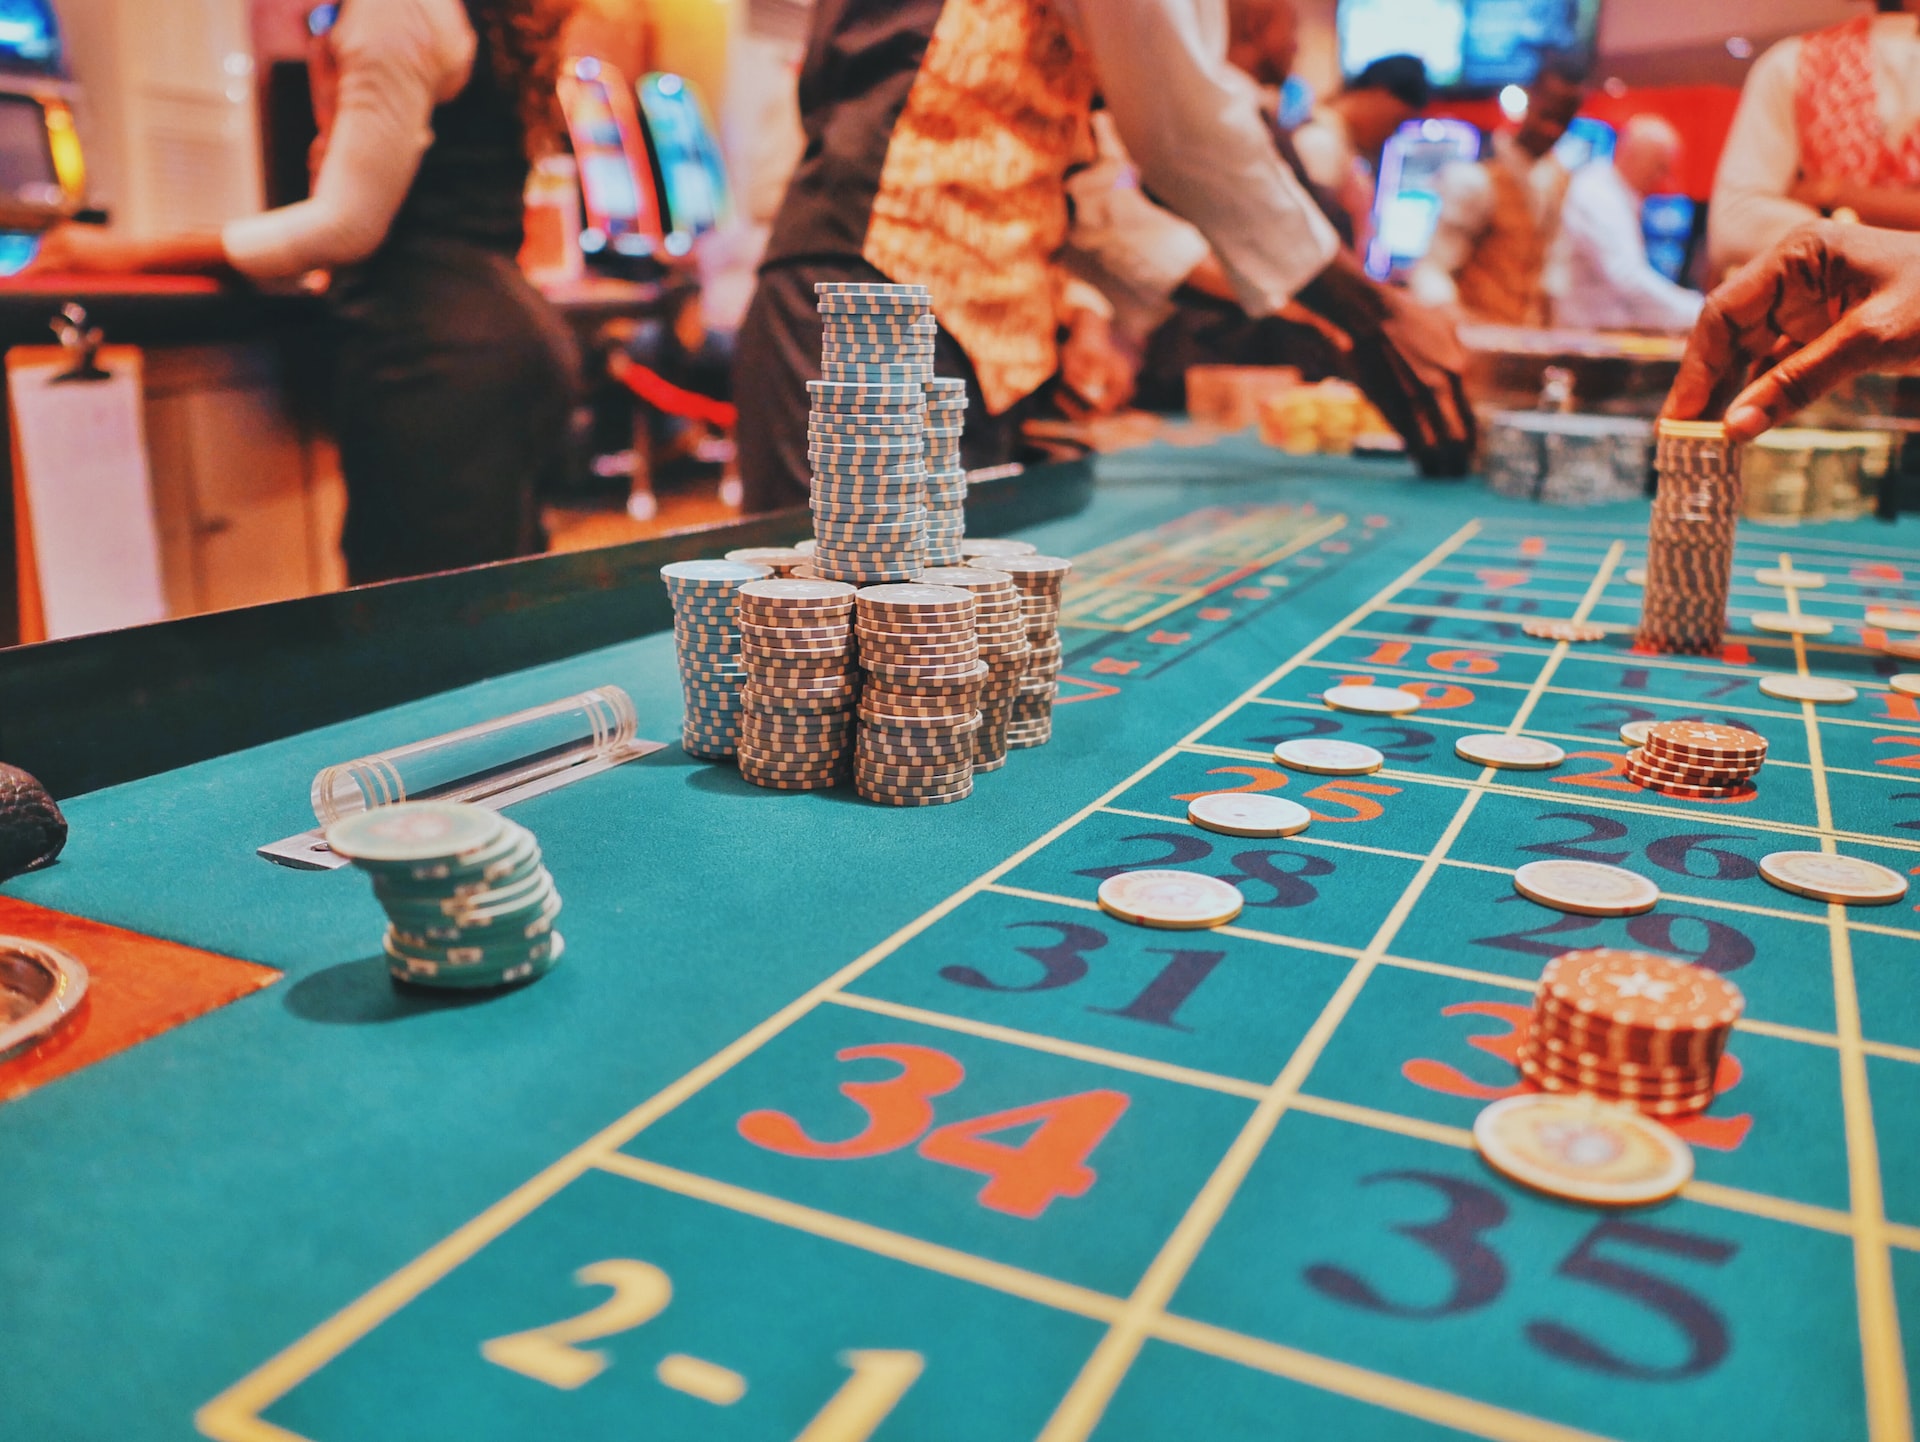 Things to Avoid When Visiting Casinos